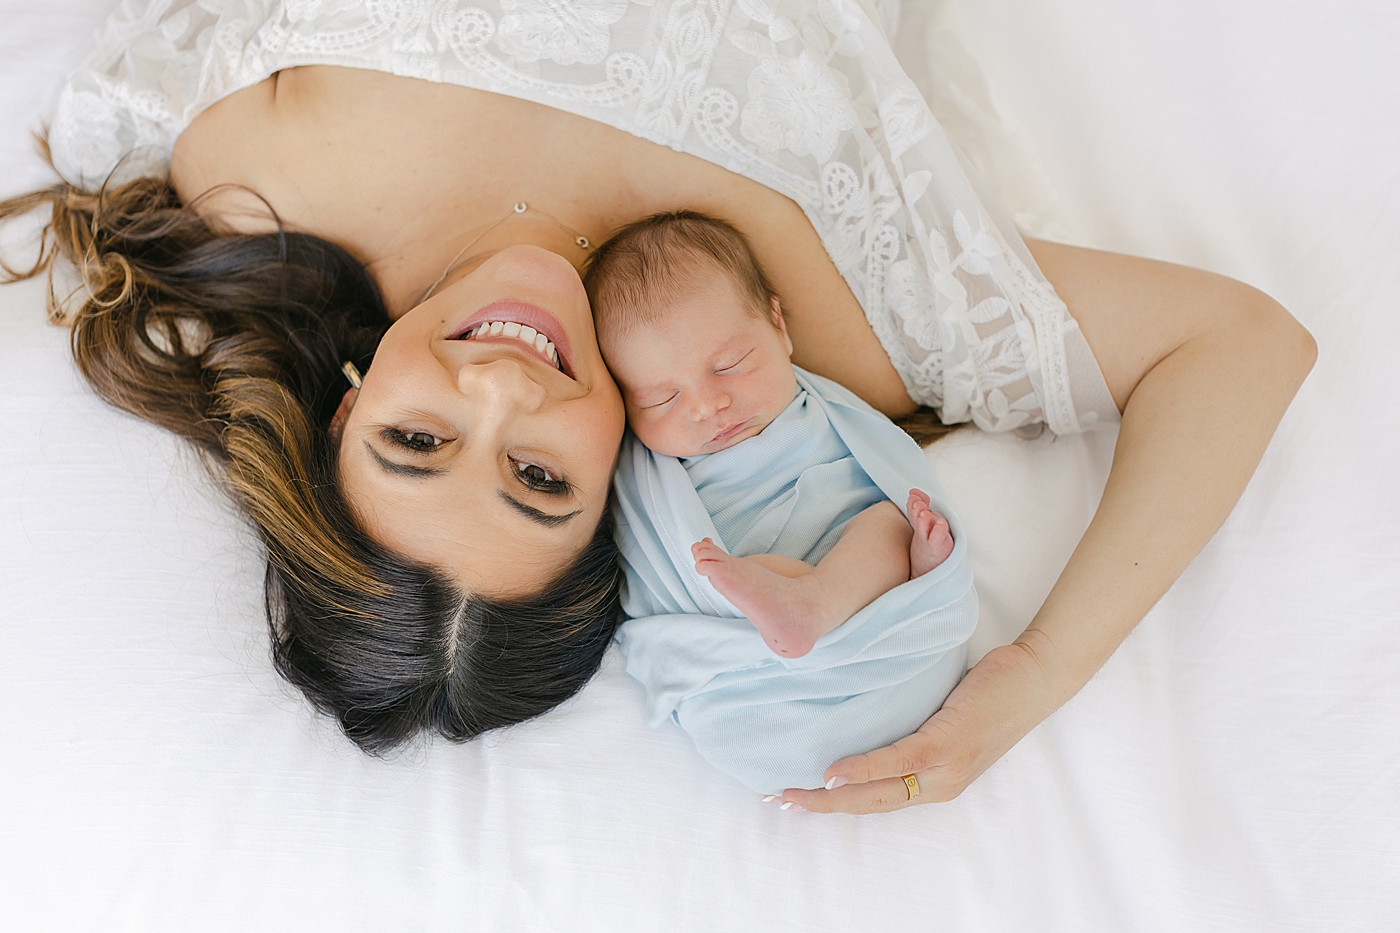 Mom smiling laying on a bed with her newborn baby | Image by Sana Ahmed Photography 